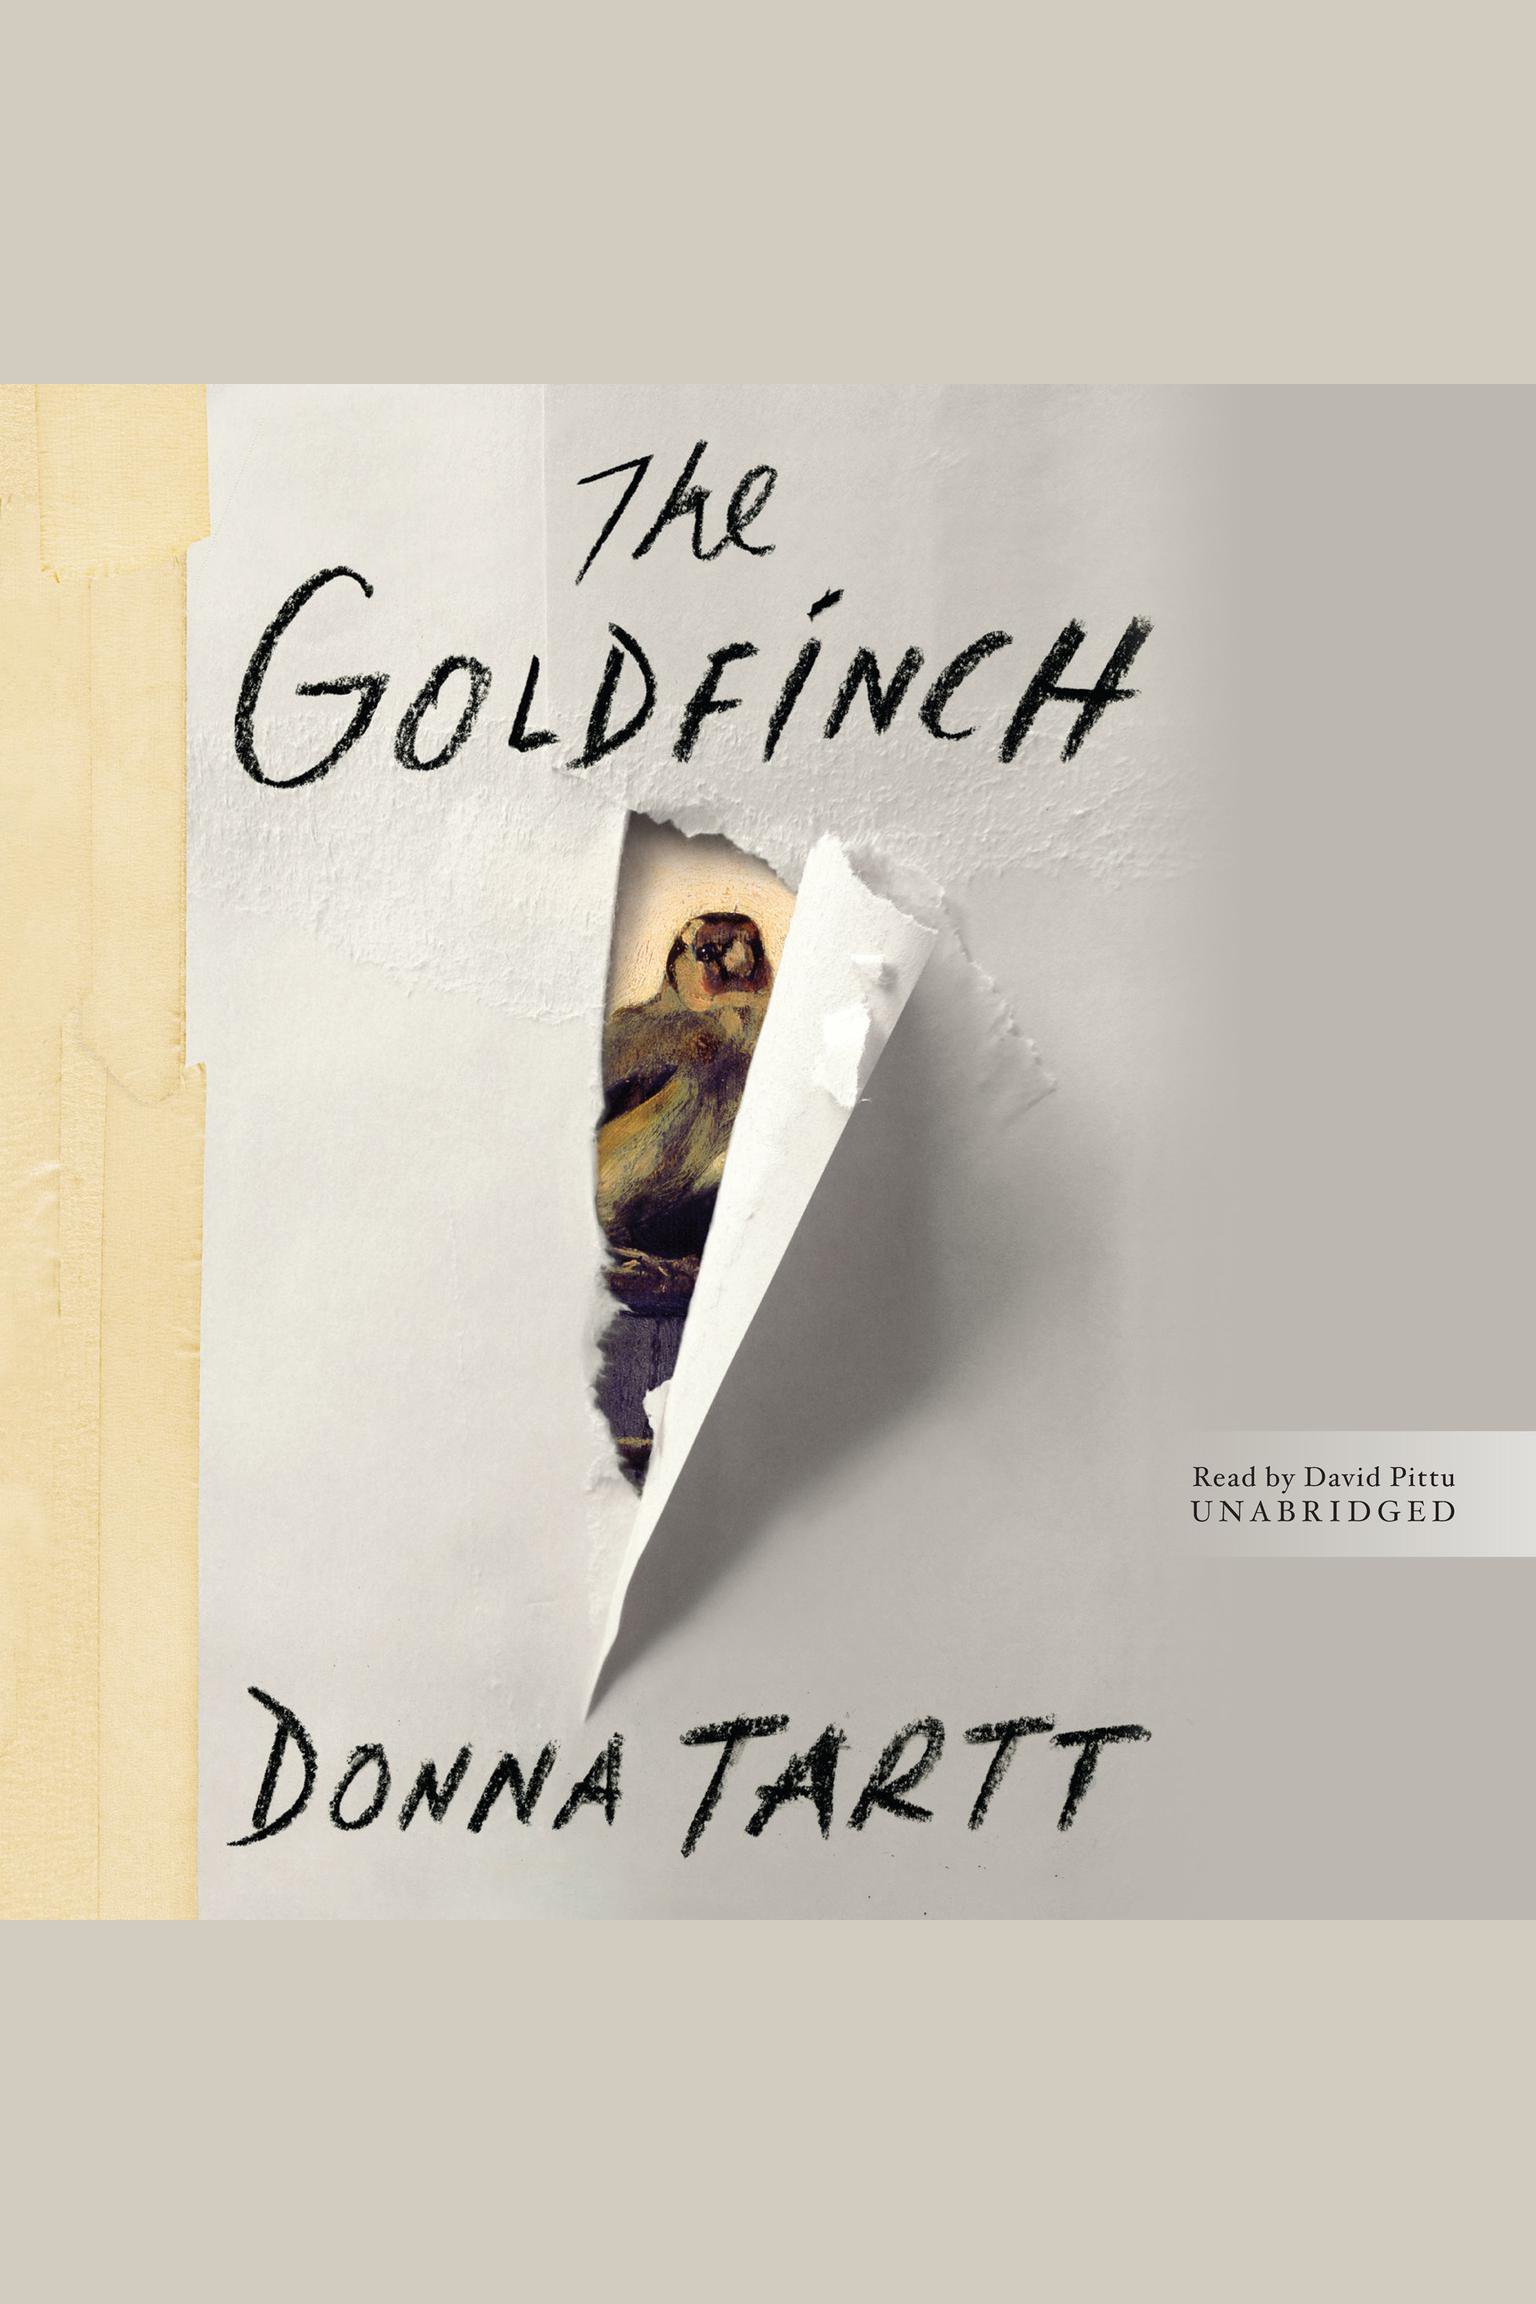 The goldfinch cover image